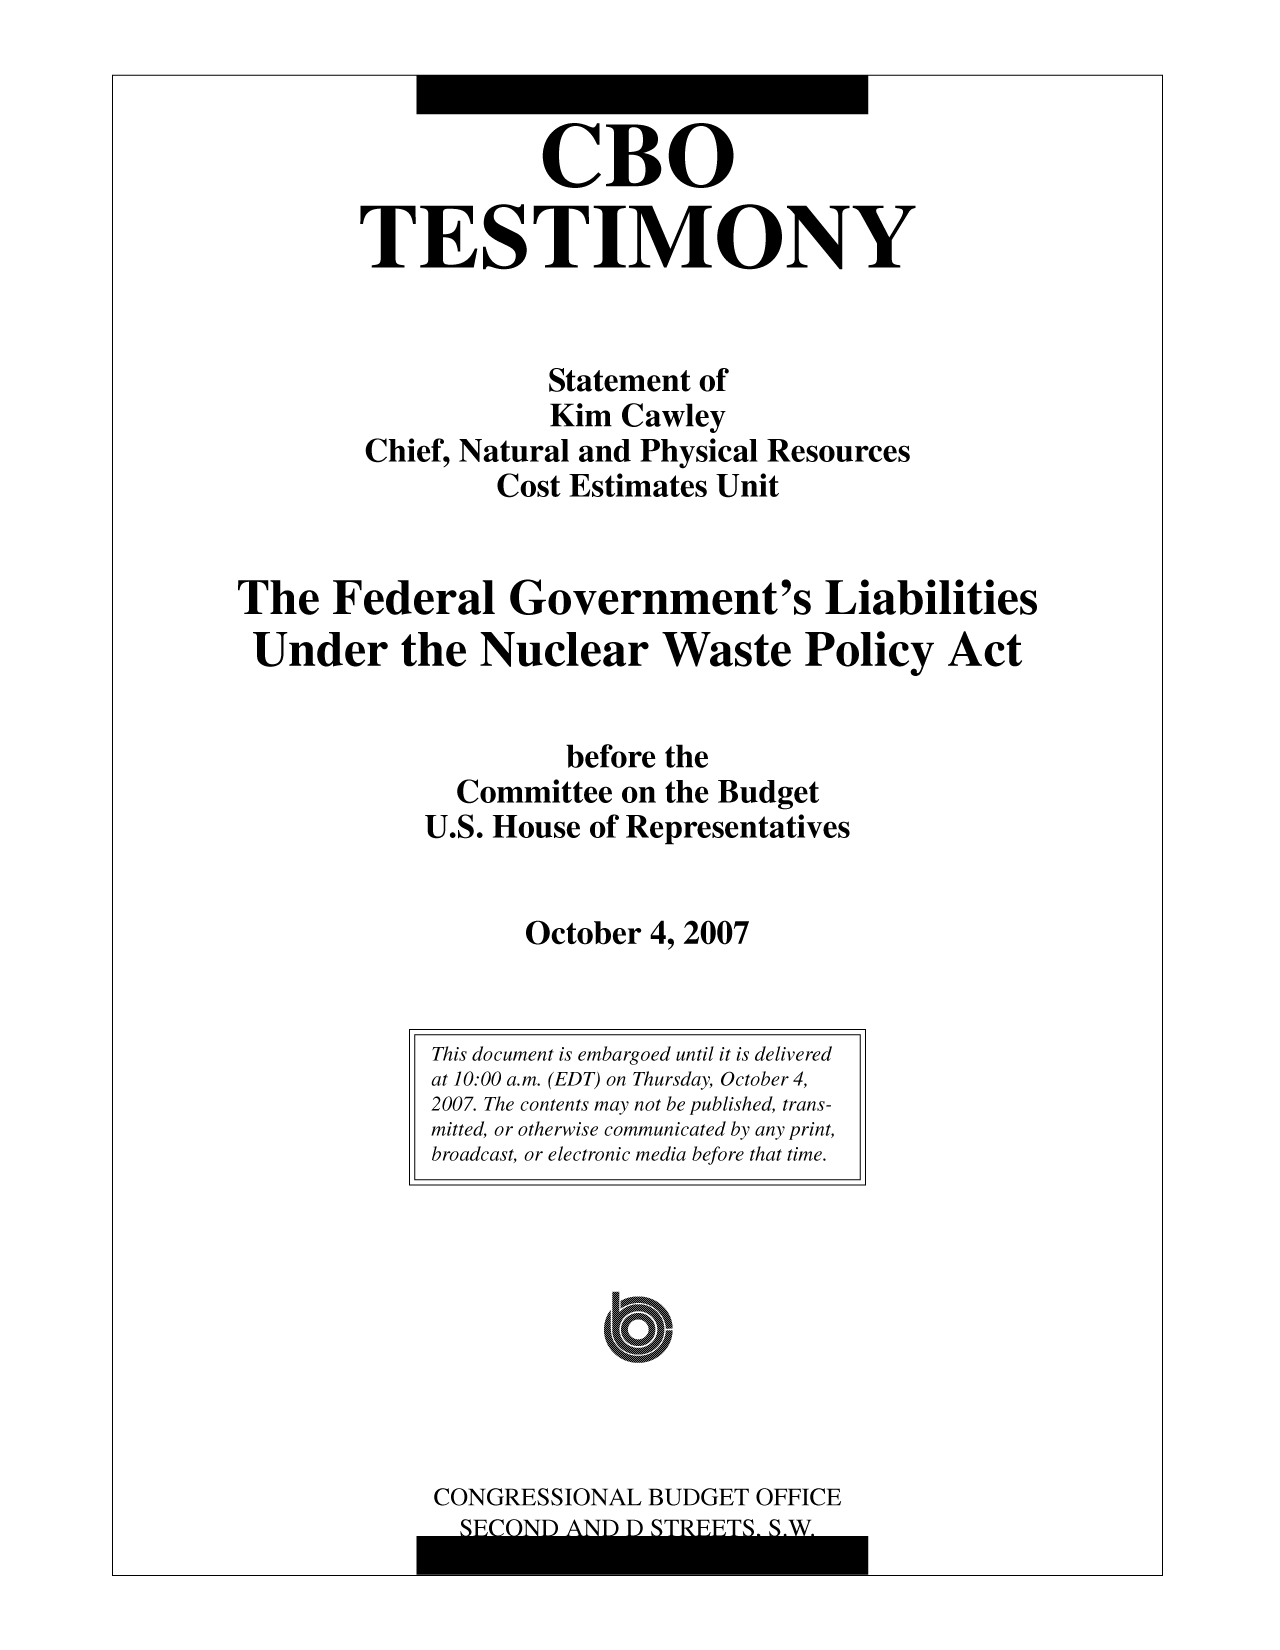 handle is hein.congrec/cbo10095 and id is 1 raw text is: CBO
TESTIMONY
Statement of
Kim Cawley
Chief, Natural and Physical Resources
Cost Estimates Unit
The Federal Government's Liabilities
Under the Nuclear Waste Policy Act
before the
Committee on the Budget
U.S. House of Representatives
October 4, 2007

CONGRESSIONAL BUDGET OFFICE

This document is embargoed until it is delivered
at 10:00 a.m. (EDT) on Thursday, October 4,
2007. The contents may not be published, trans-
mitted, or otherwise communicated by any print,
broadcast, or electronic media before that time.

i


